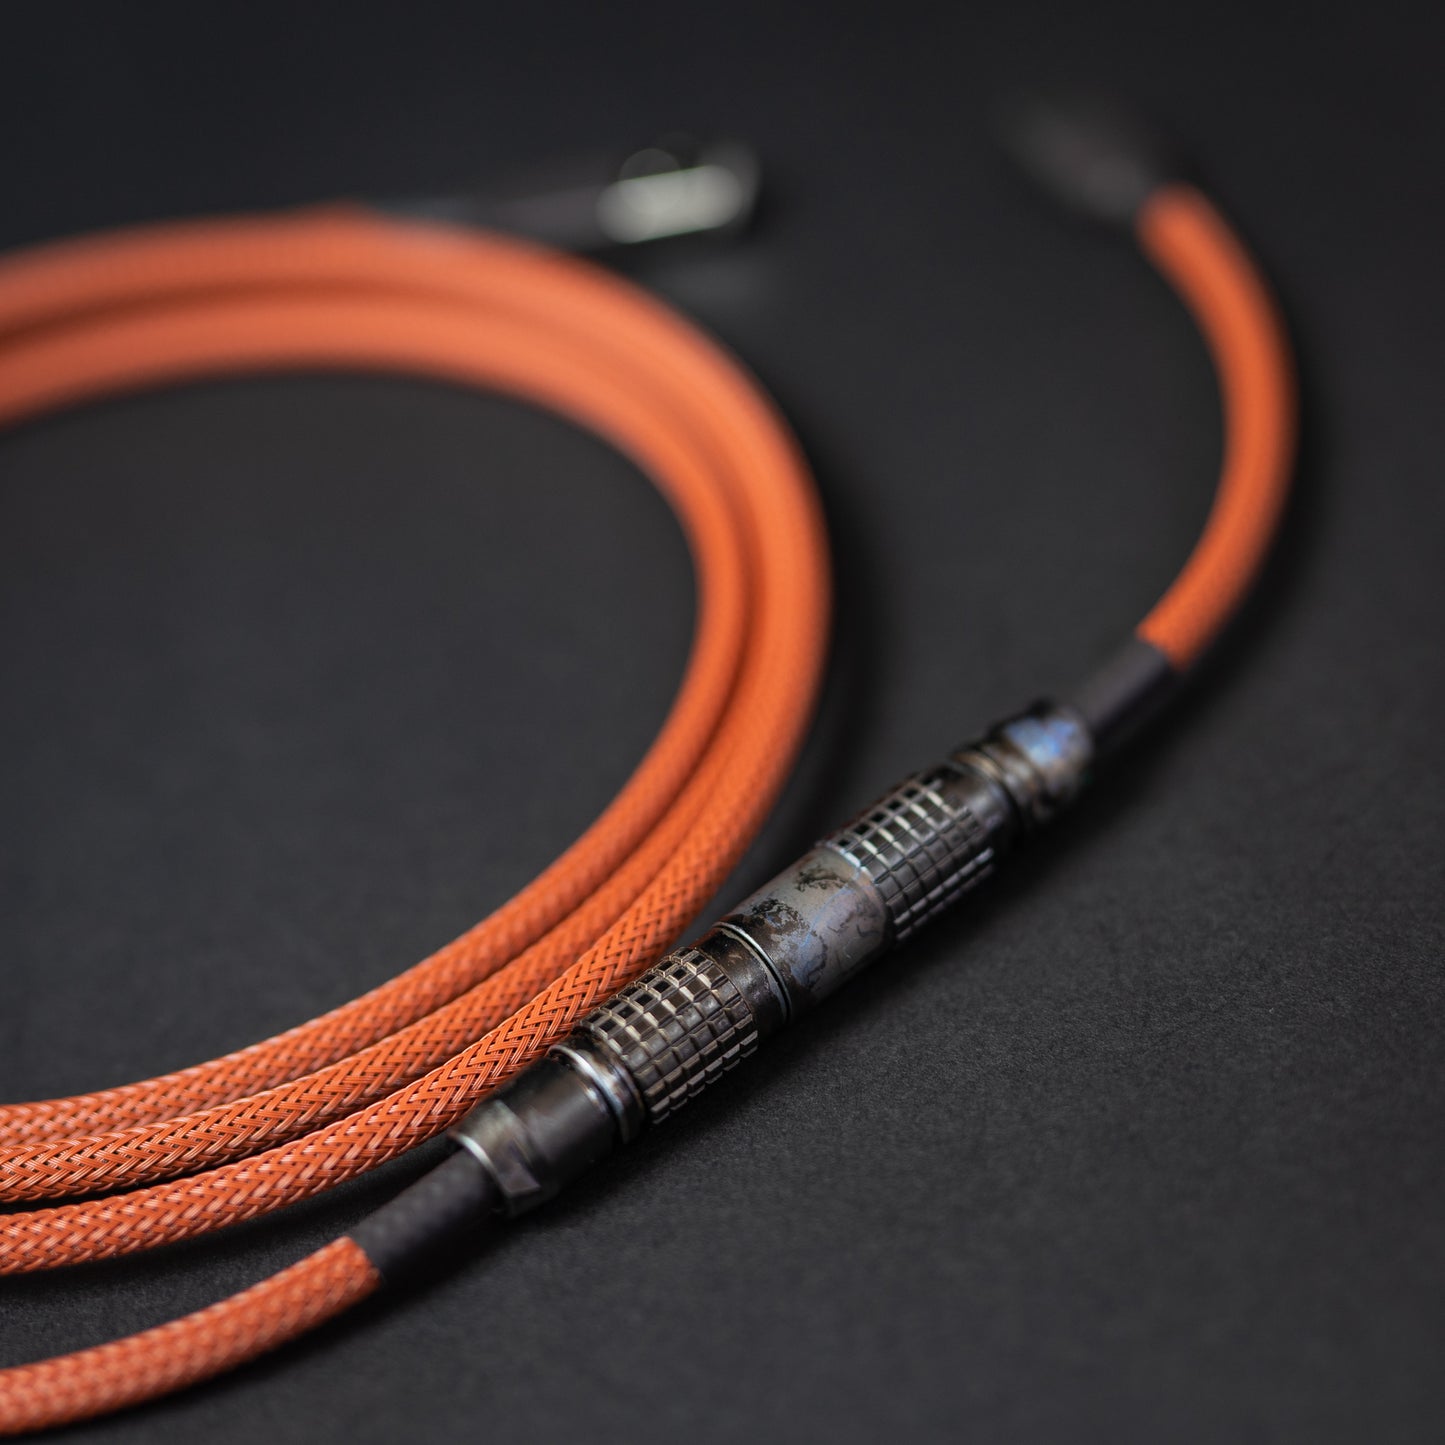 OIL QUENCHED MECHANICAL KEYBOARD CABLES